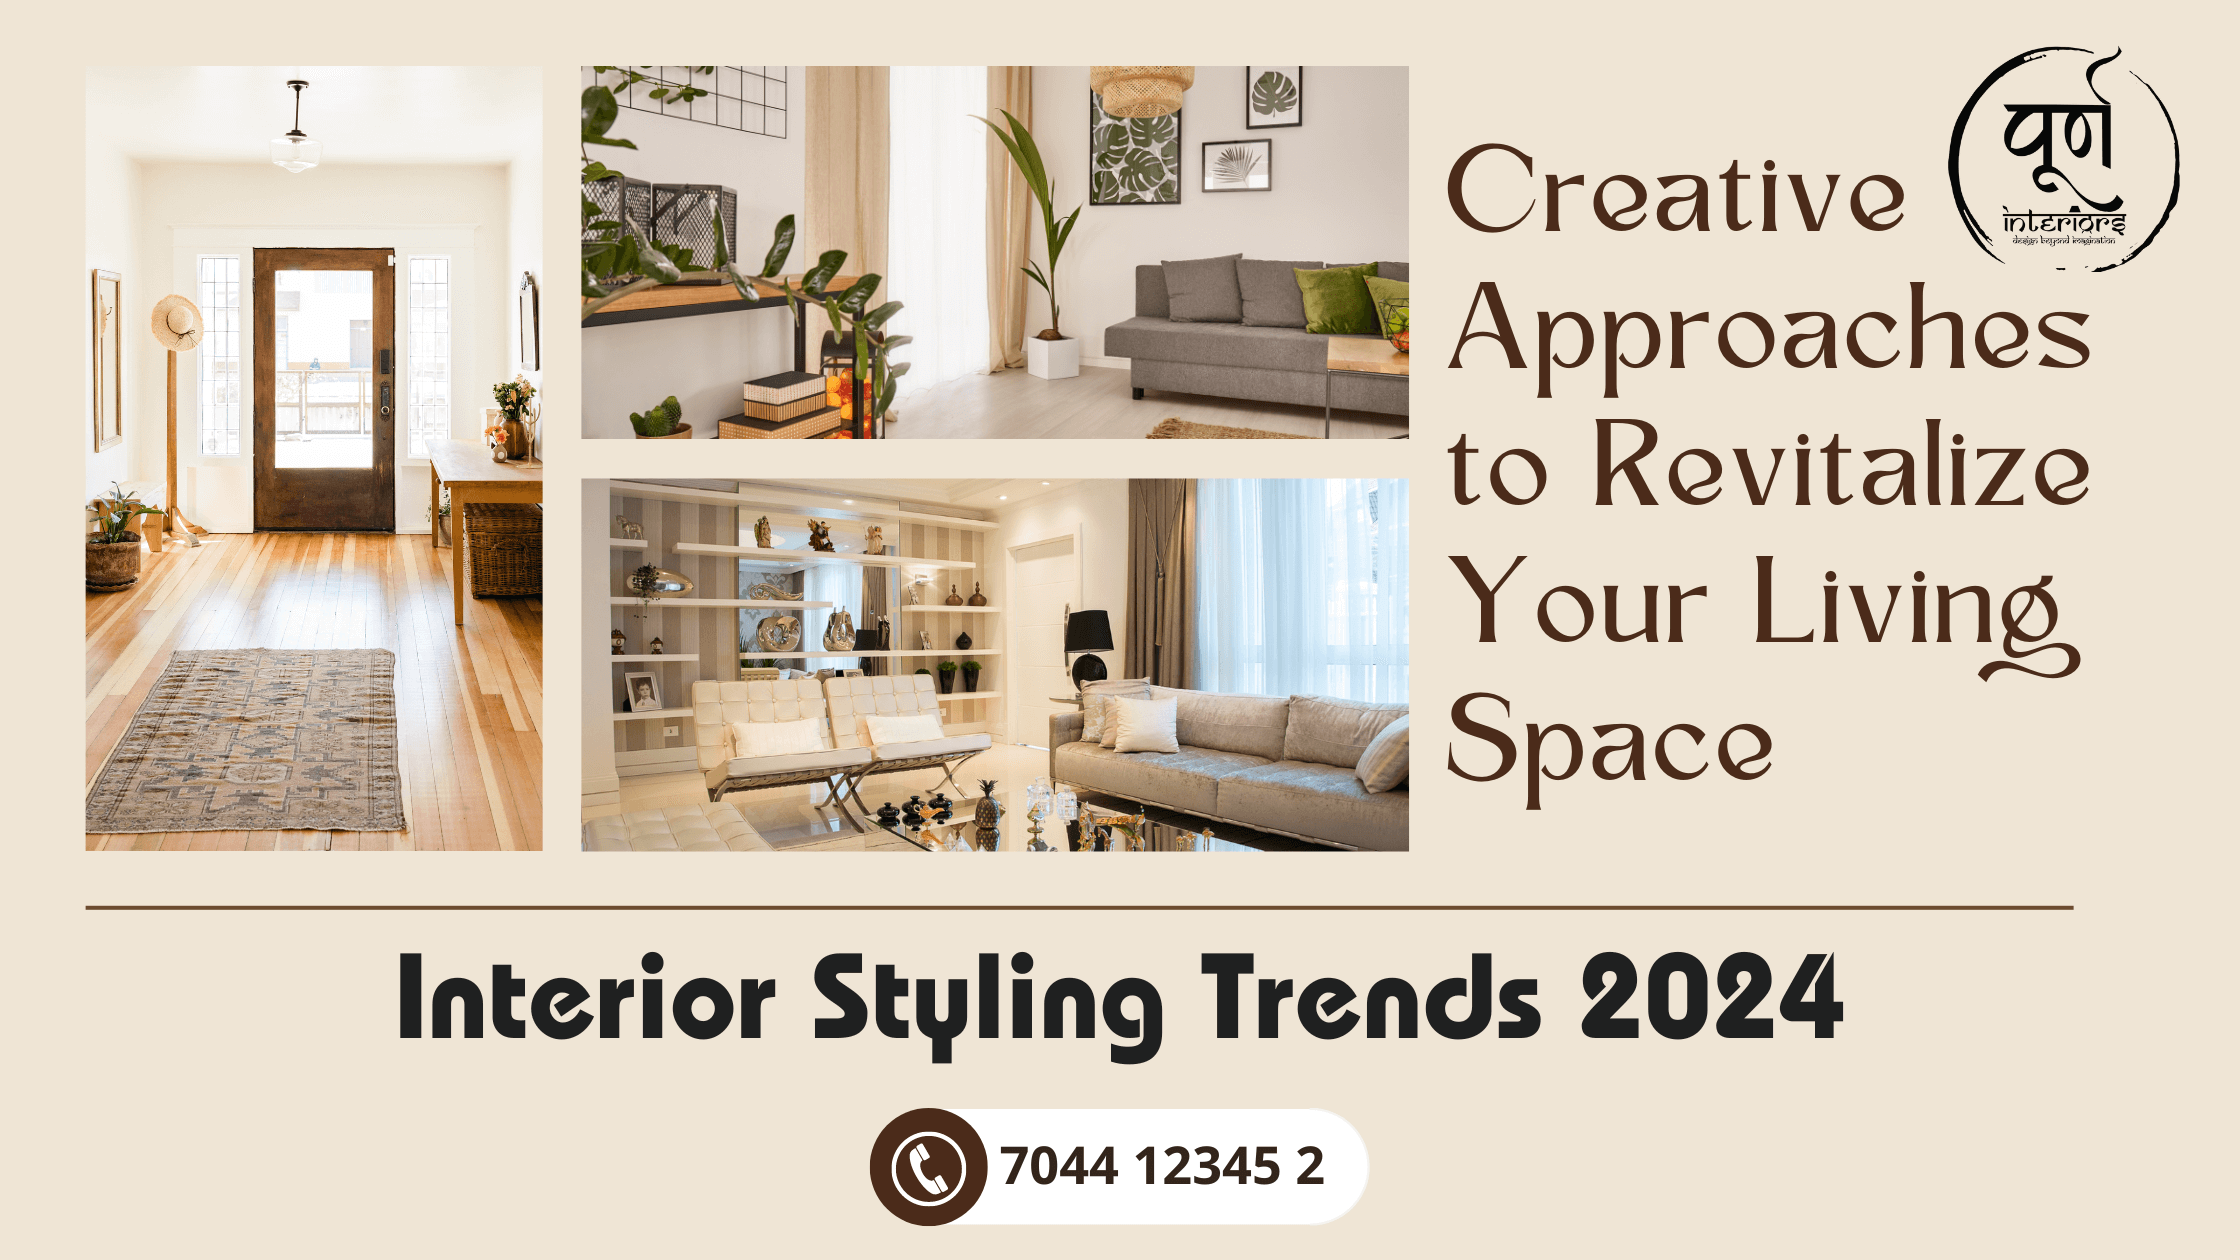 Interior Design Trends 2024 - Creative Approaches to Revitalize Your Living Space